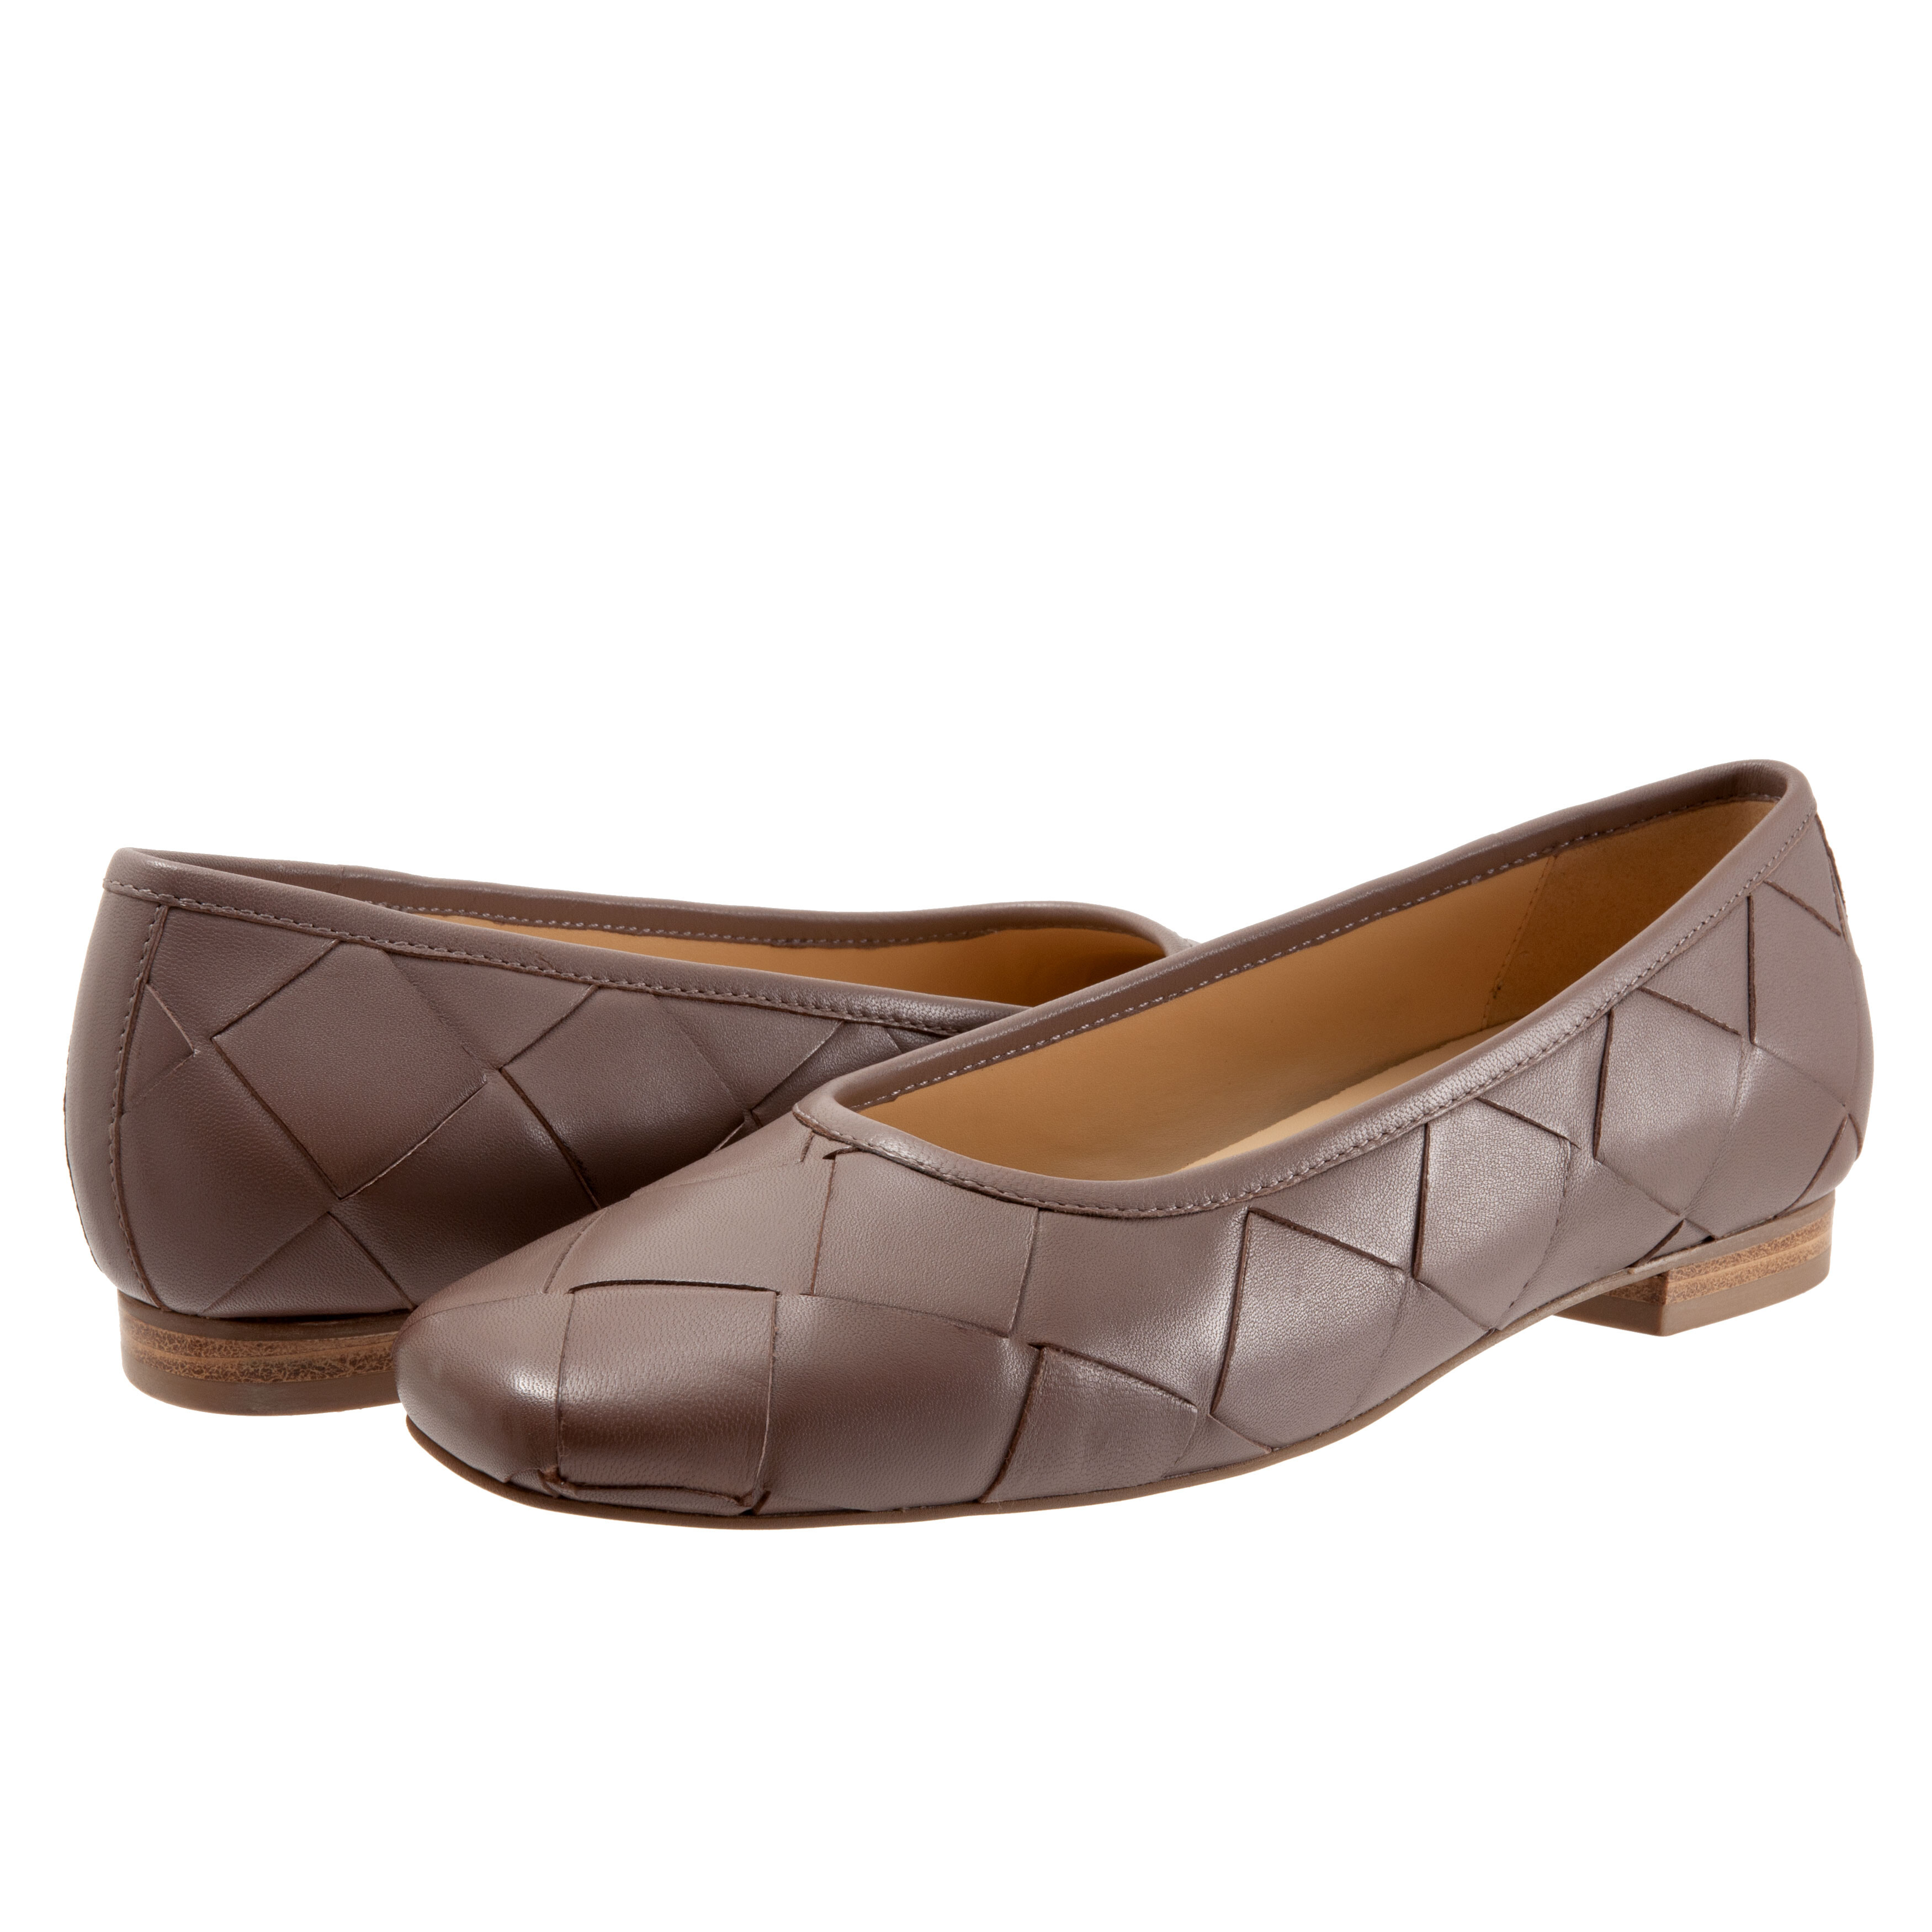 Incaltaminte Femei Trotters Hanny Taupe